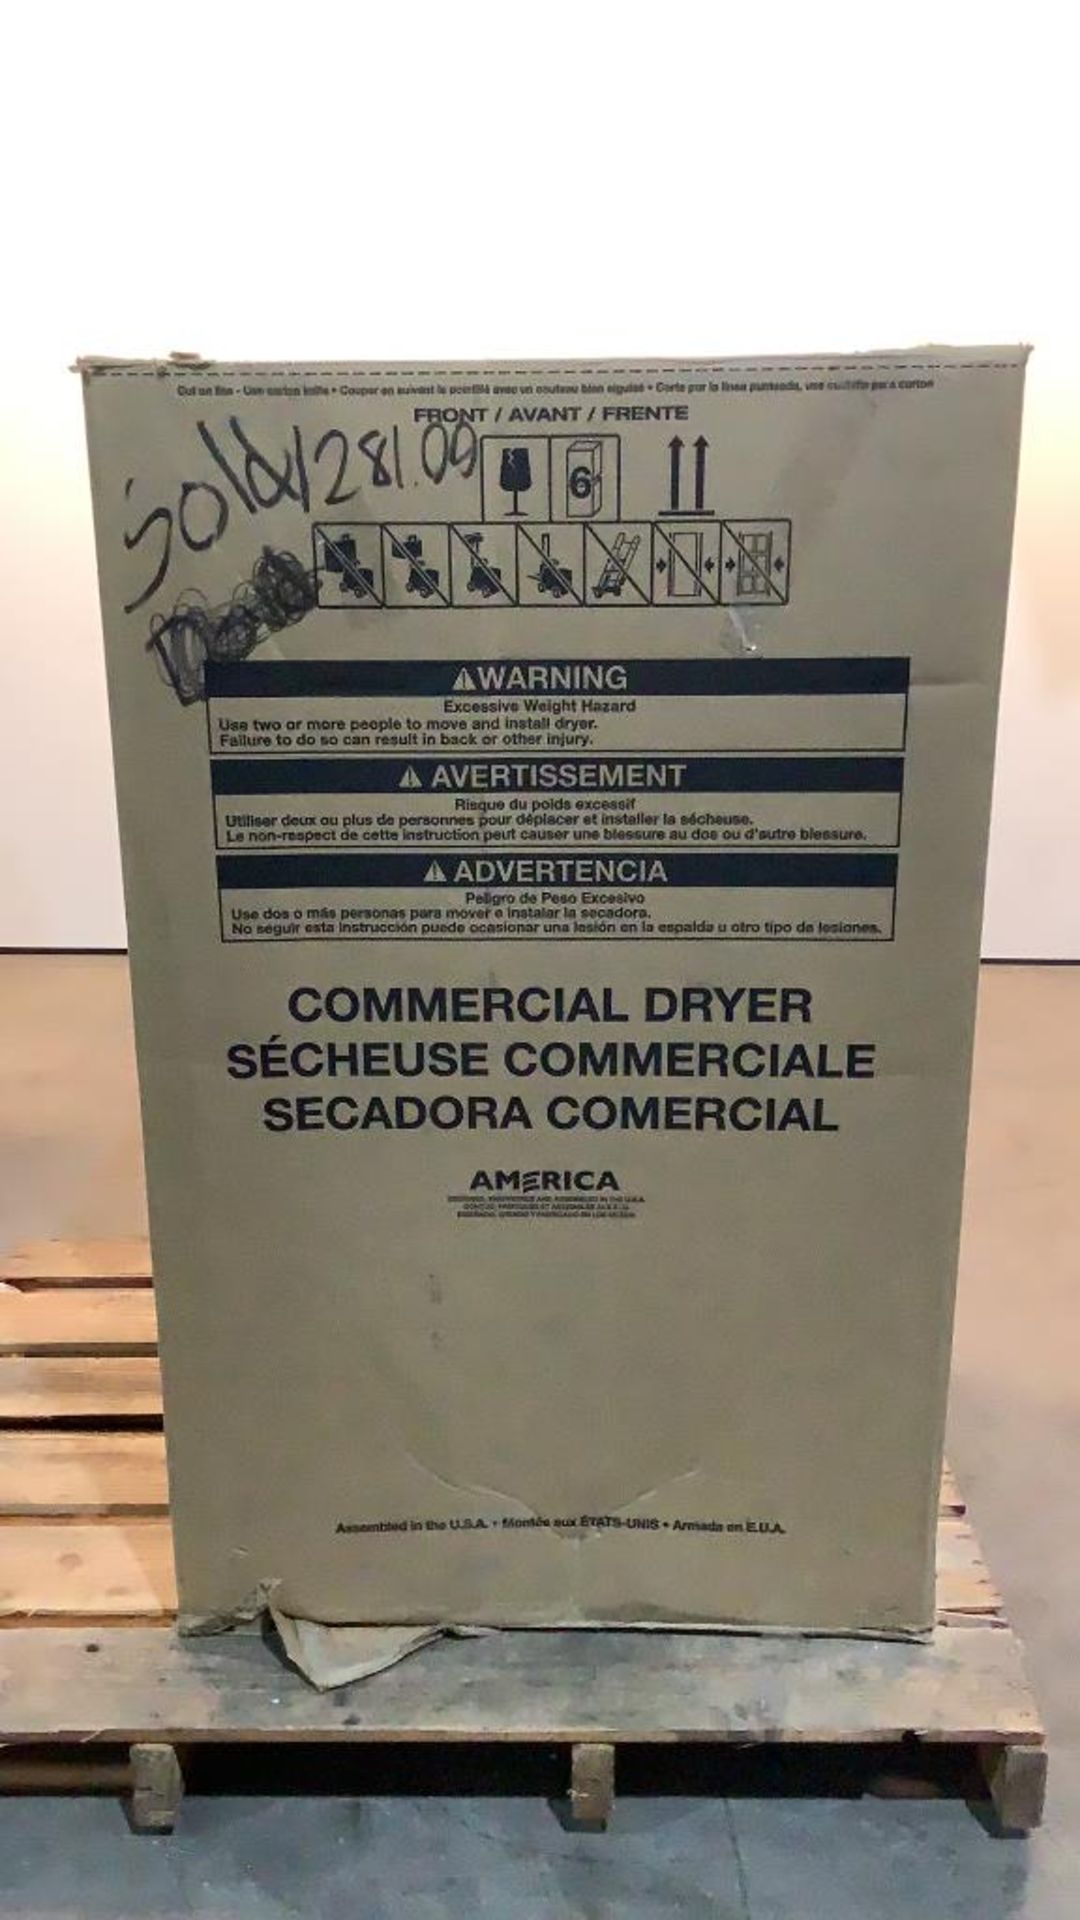 *New* Whirlpool Commerical Gas Dryer CGD9160GW - Image 14 of 20